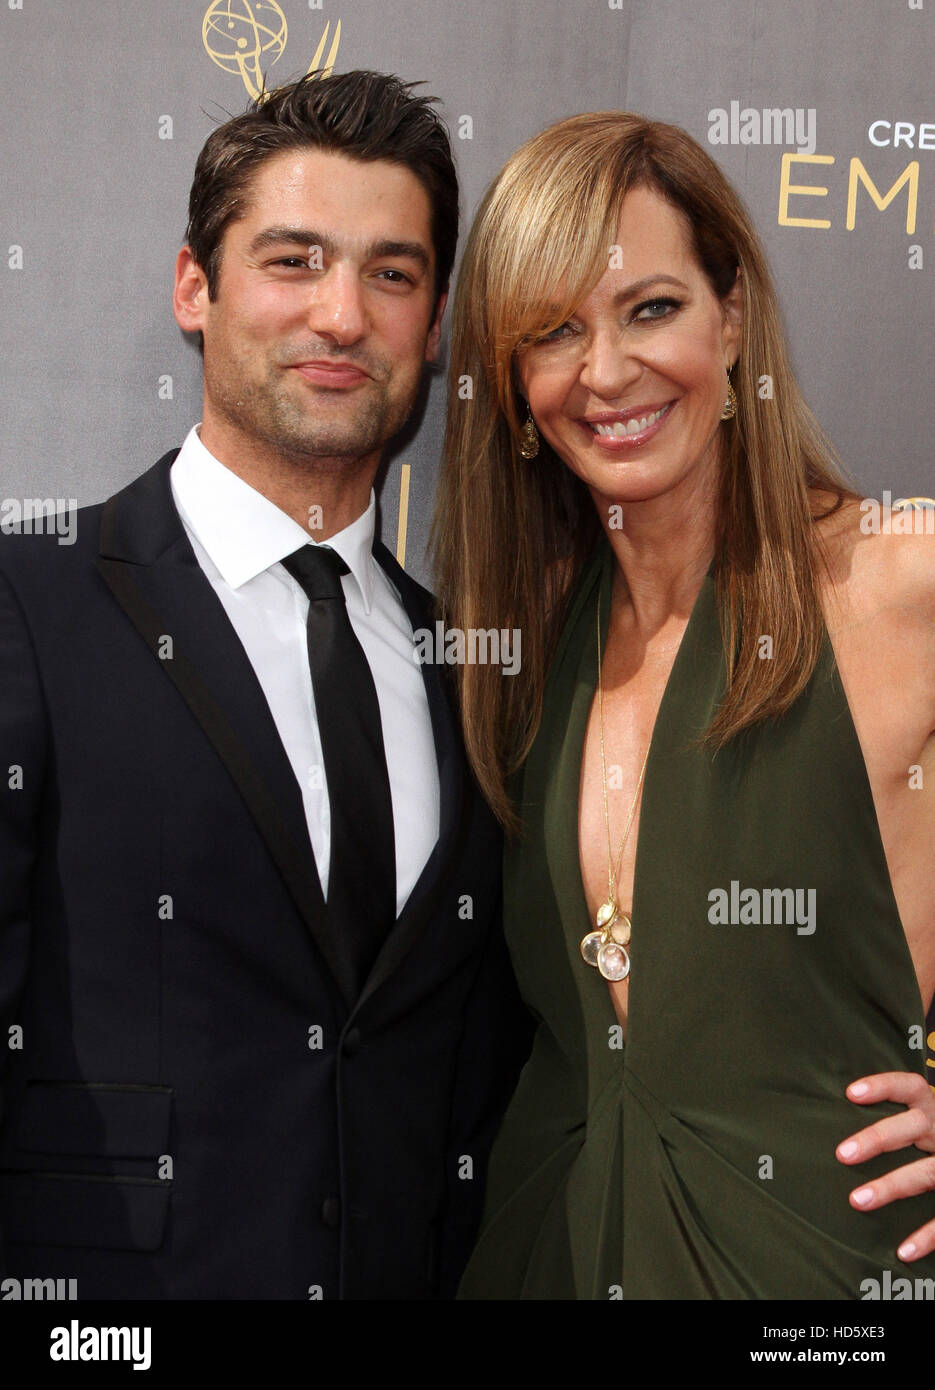 Creative Arts Emmy Awards 2016 -  Day 1 held at the Microsoft Theatre  Featuring: Allison Janney, boyfriend Philip Joncas Where: Los Angeles, California, United States When: 10 Sep 2016 Stock Photo